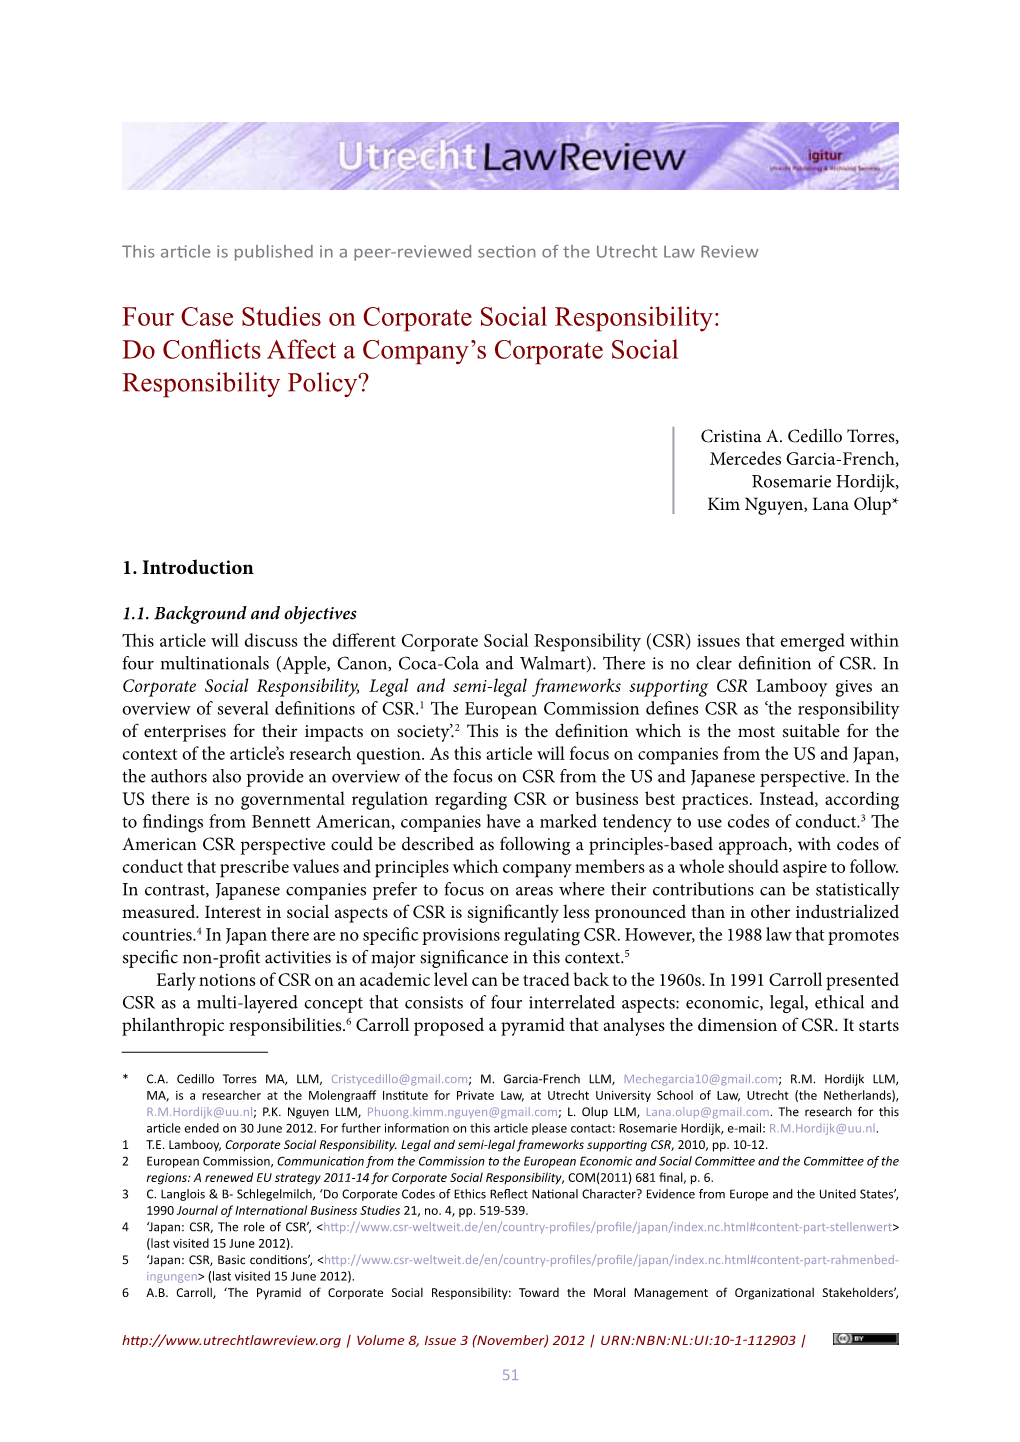 Four Case Studies on Corporate Social Responsibility: Do Conflicts Affect a Company’S Corporate Social Responsibility Policy?